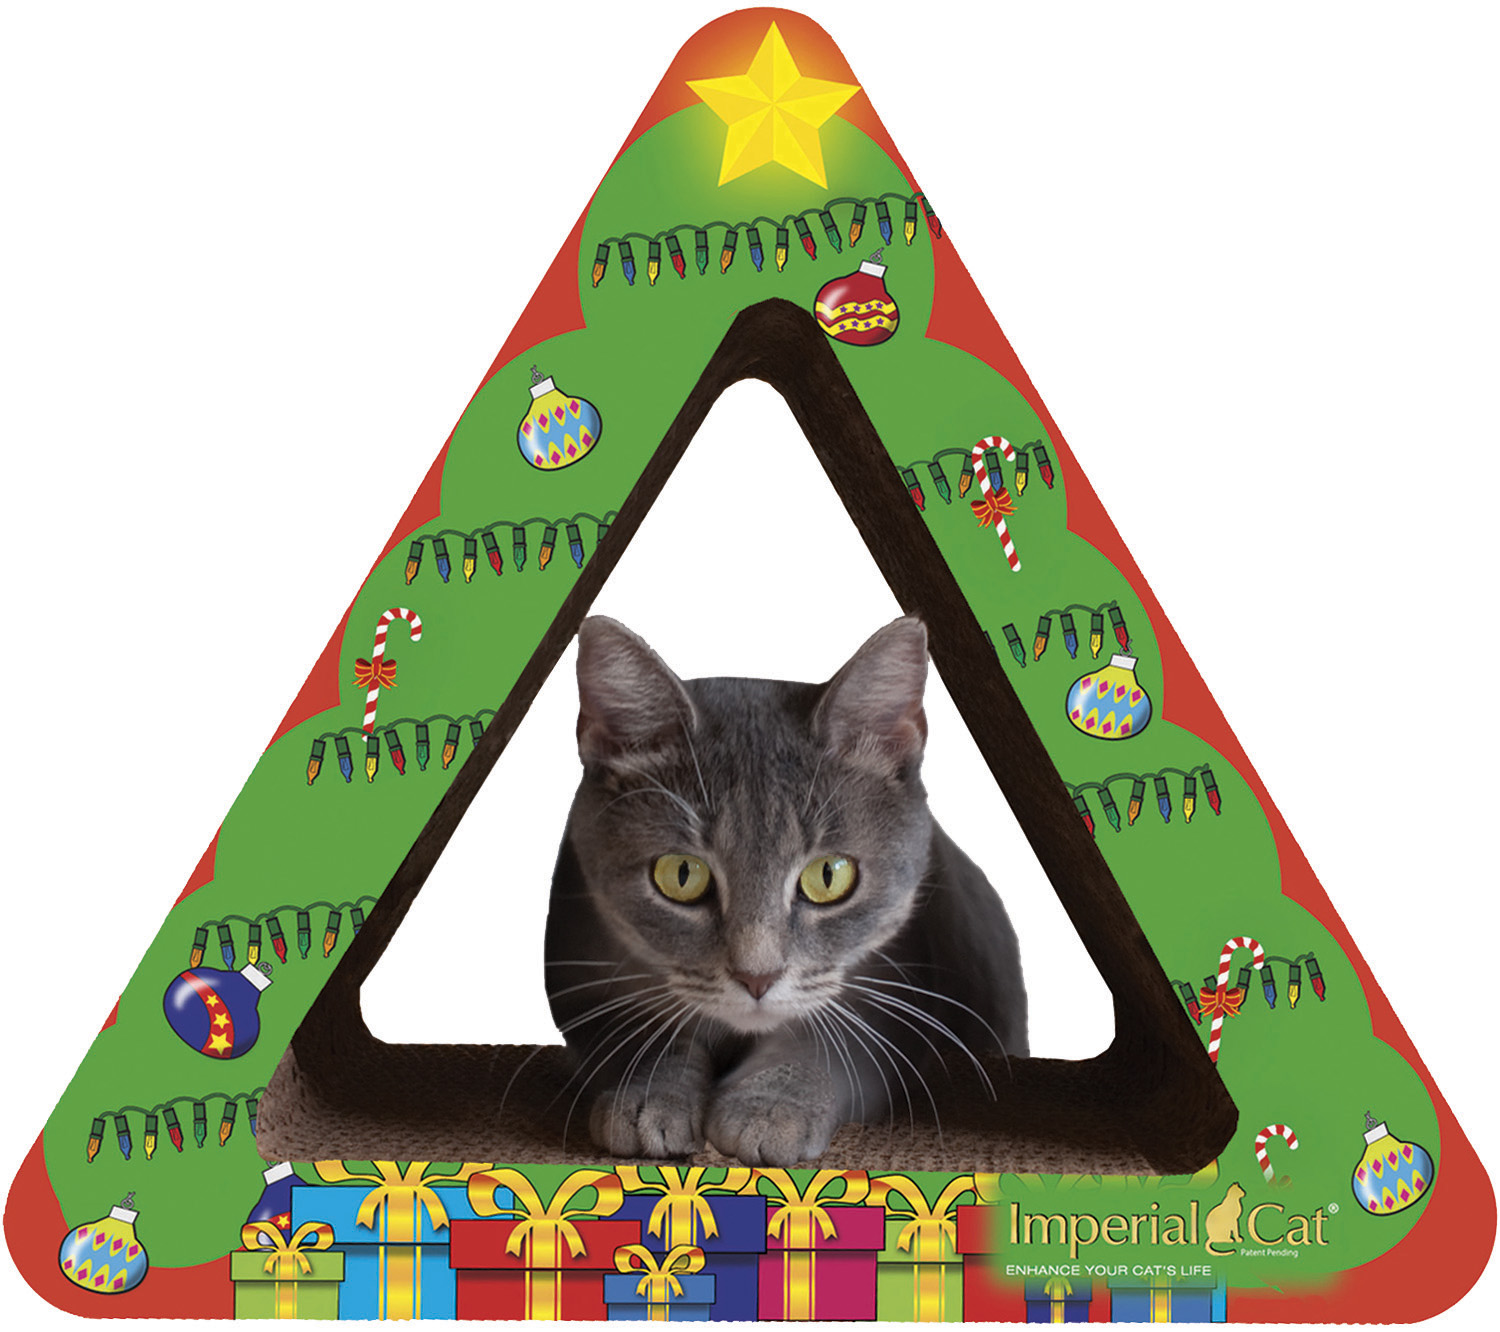 Imperial Cat Scratch ‘n Shapes Giveaway for You and Your Shelter